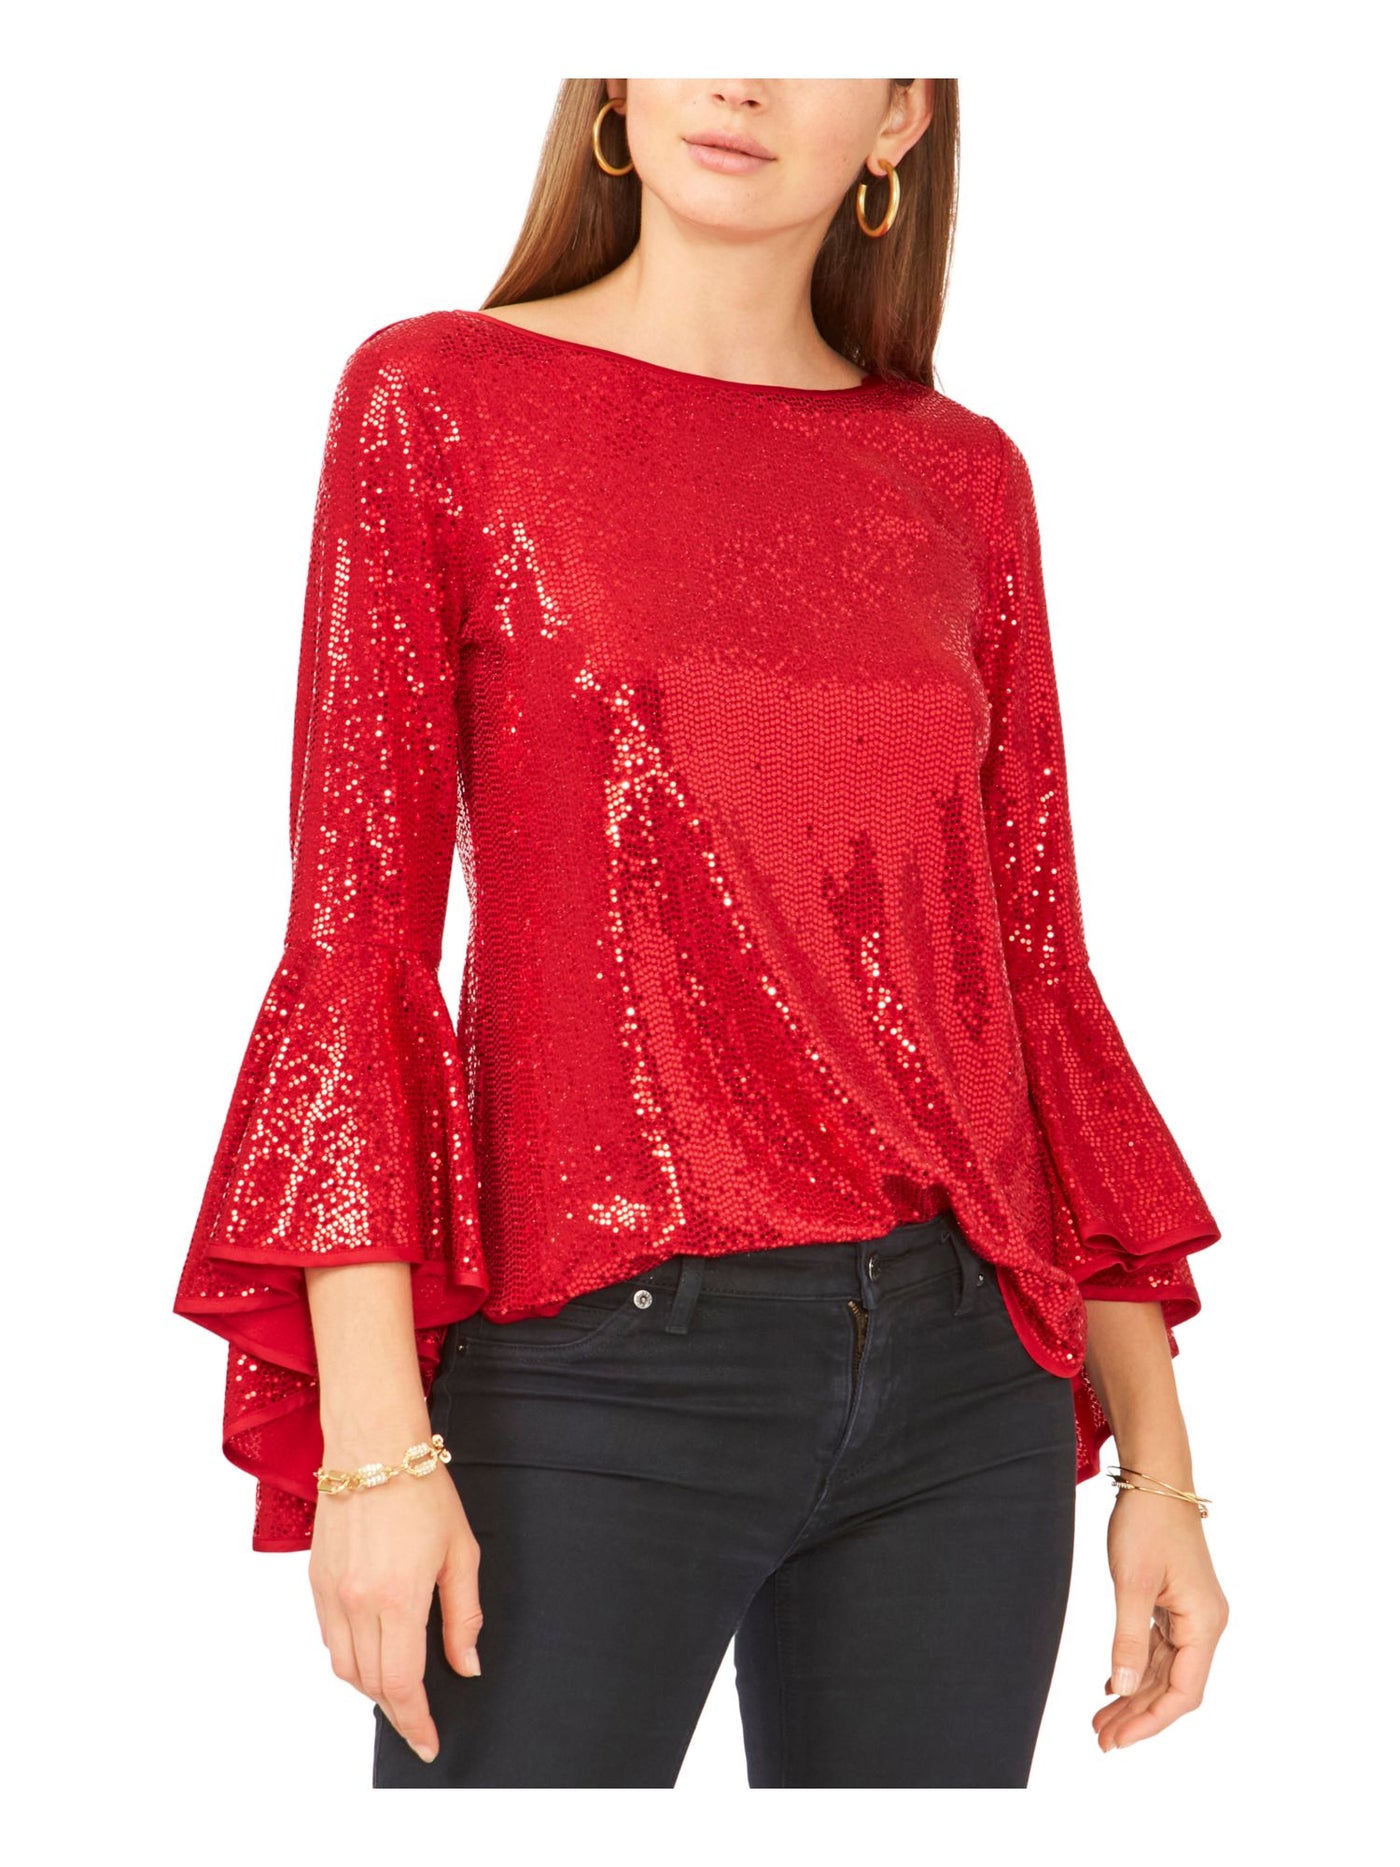 VINCE CAMUTO Womens Red Metallic Textured Curved Hem Flutter Sleeve Boat Neck Evening Top XS